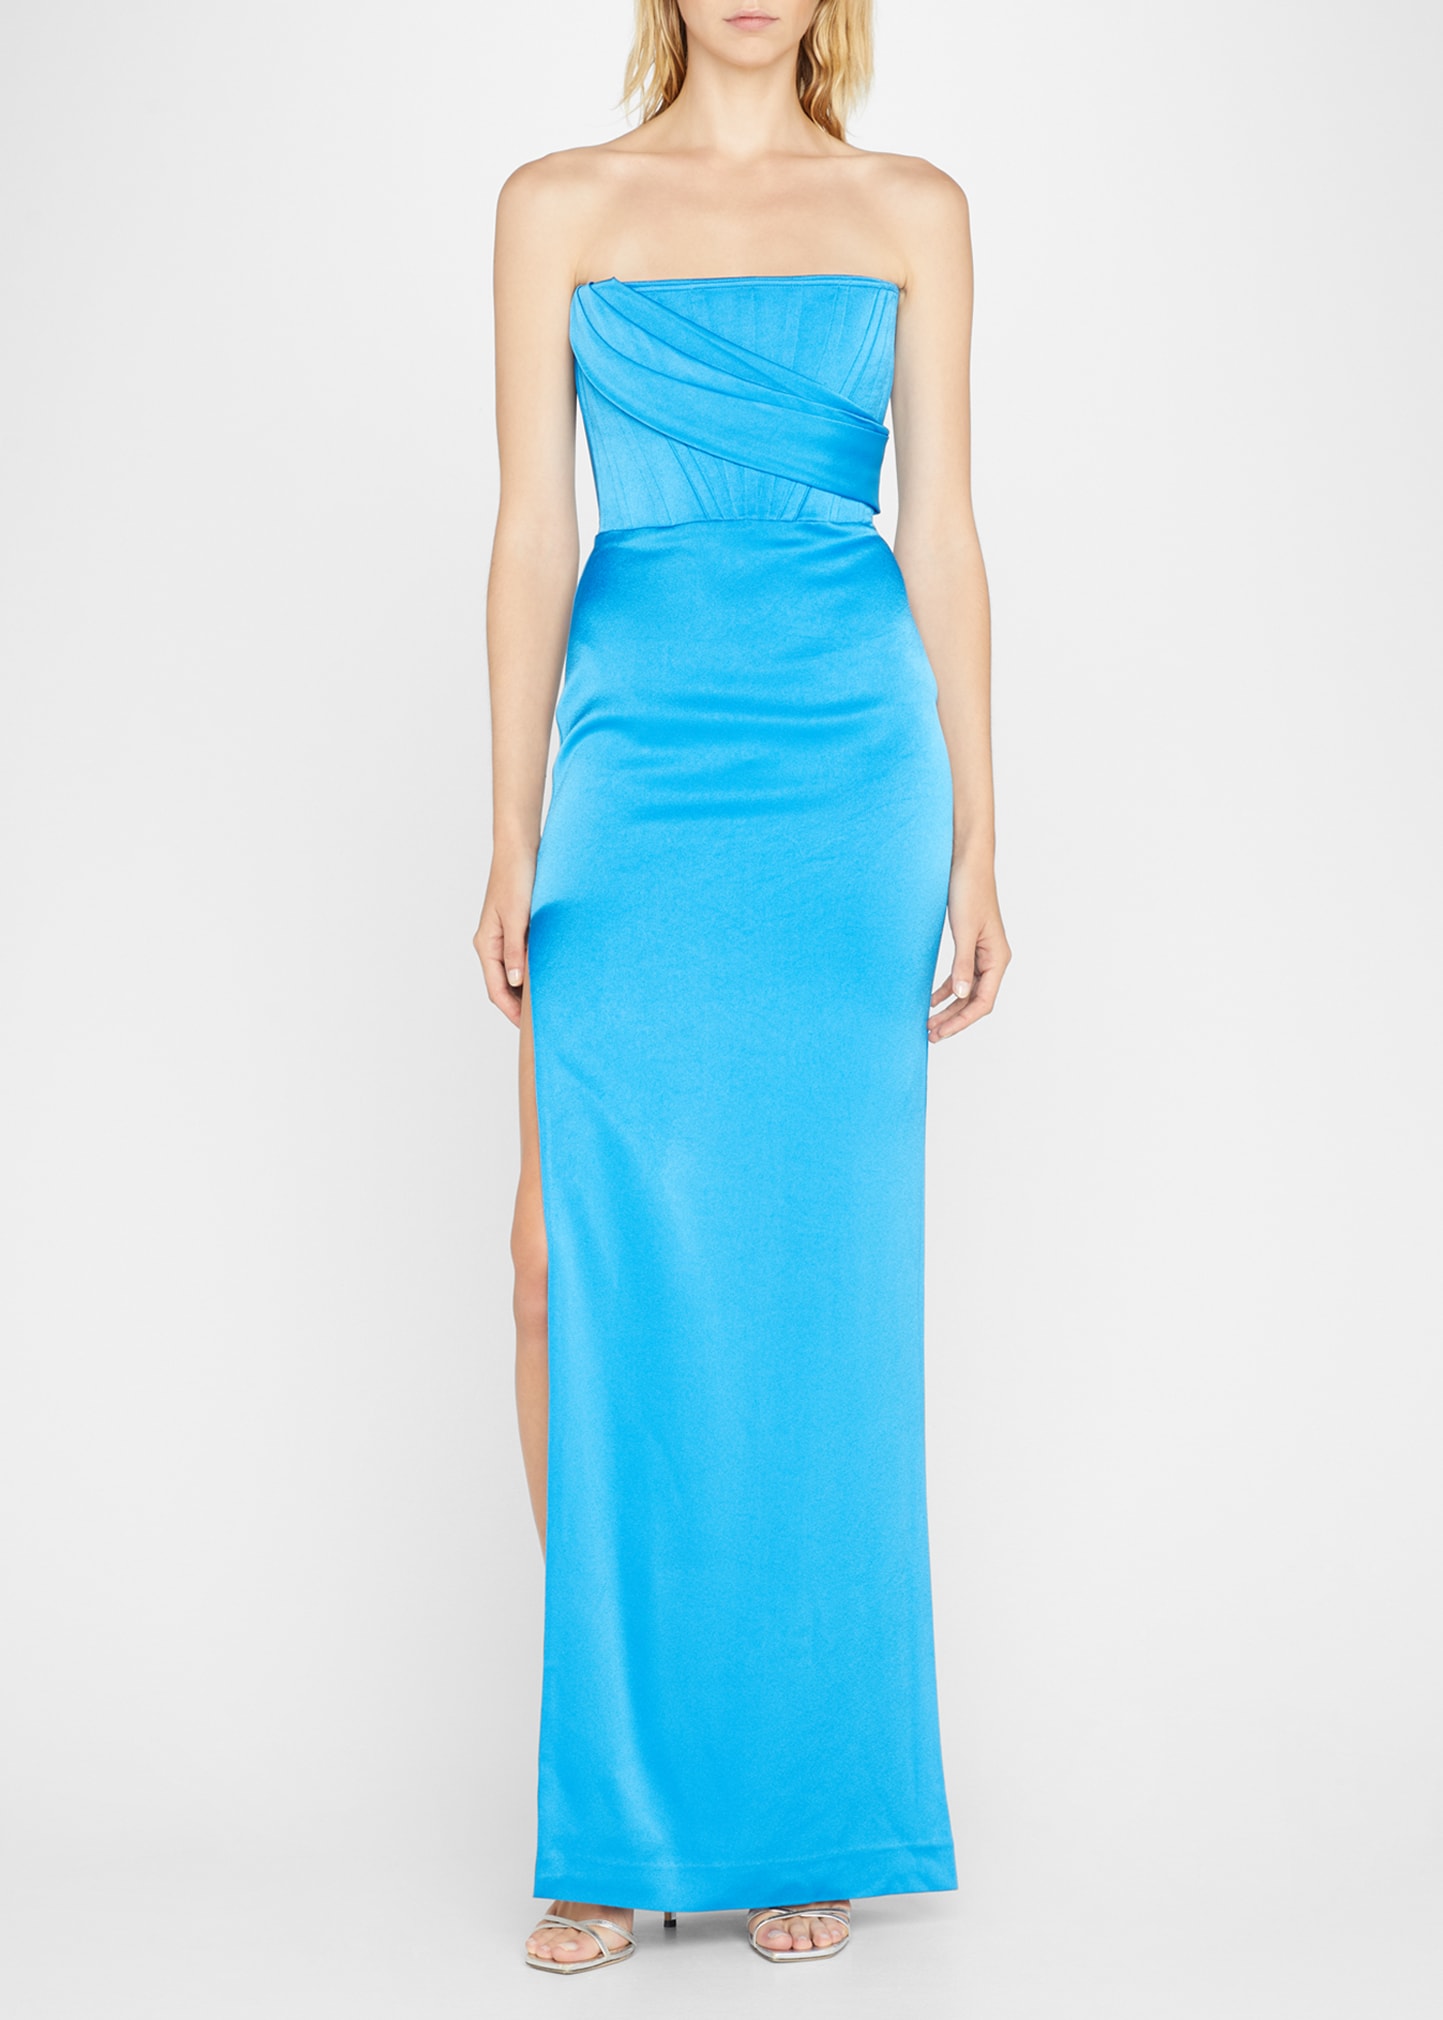 Alex Perry Satin crêpe draped bustier gown Alex Perry